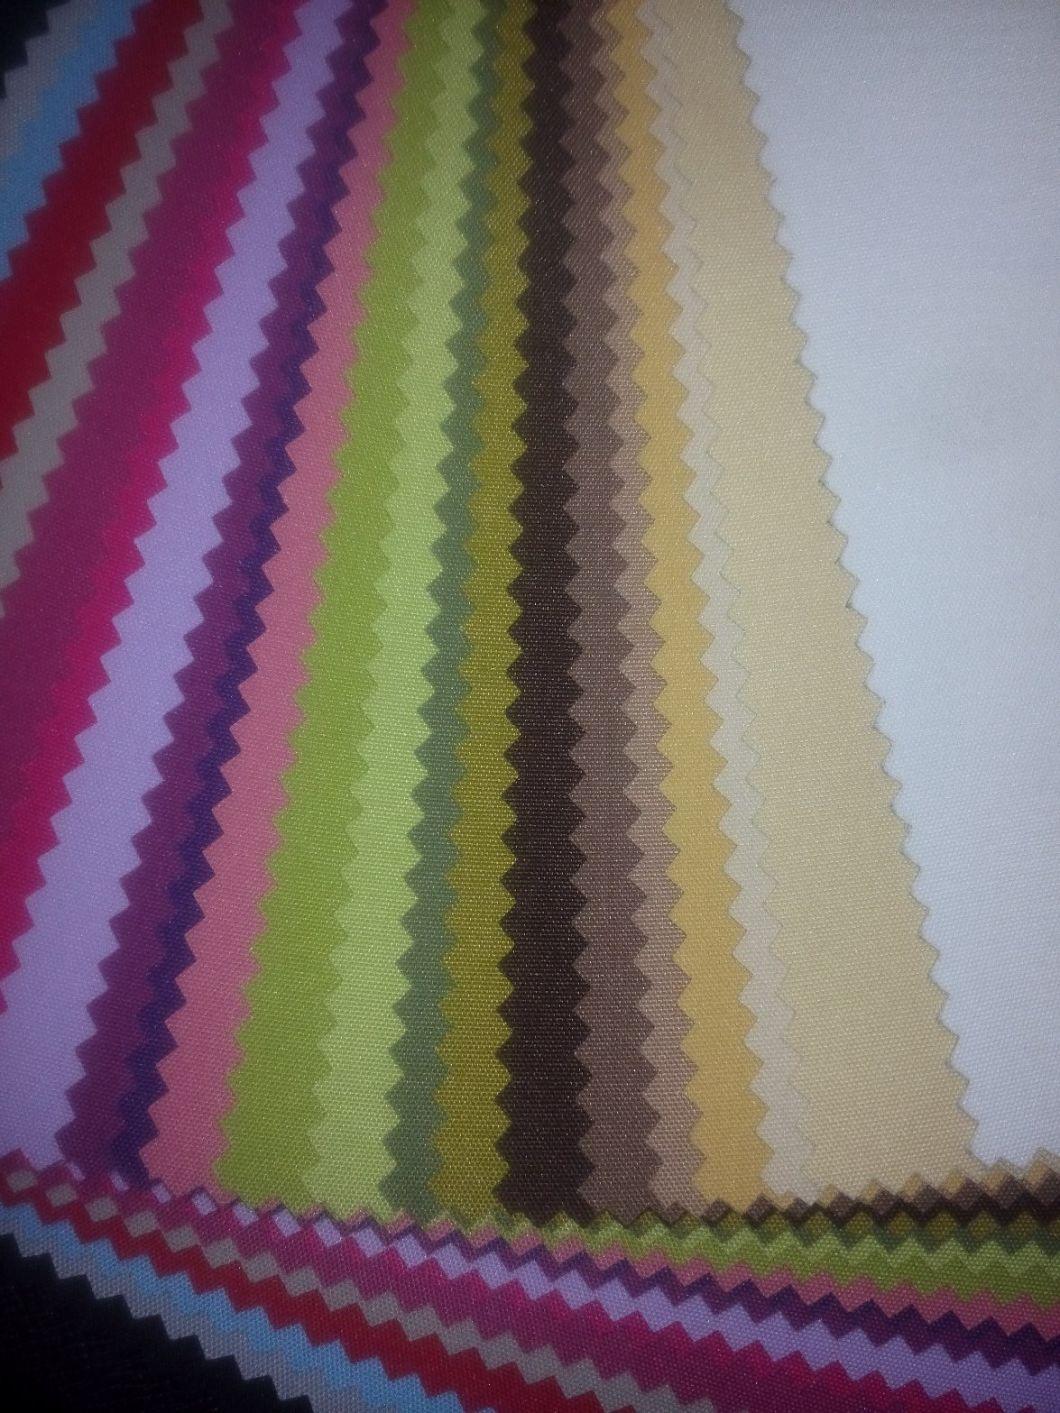 Color Coated or Silver Coated 100% Blackout Roller Blinds Fabric